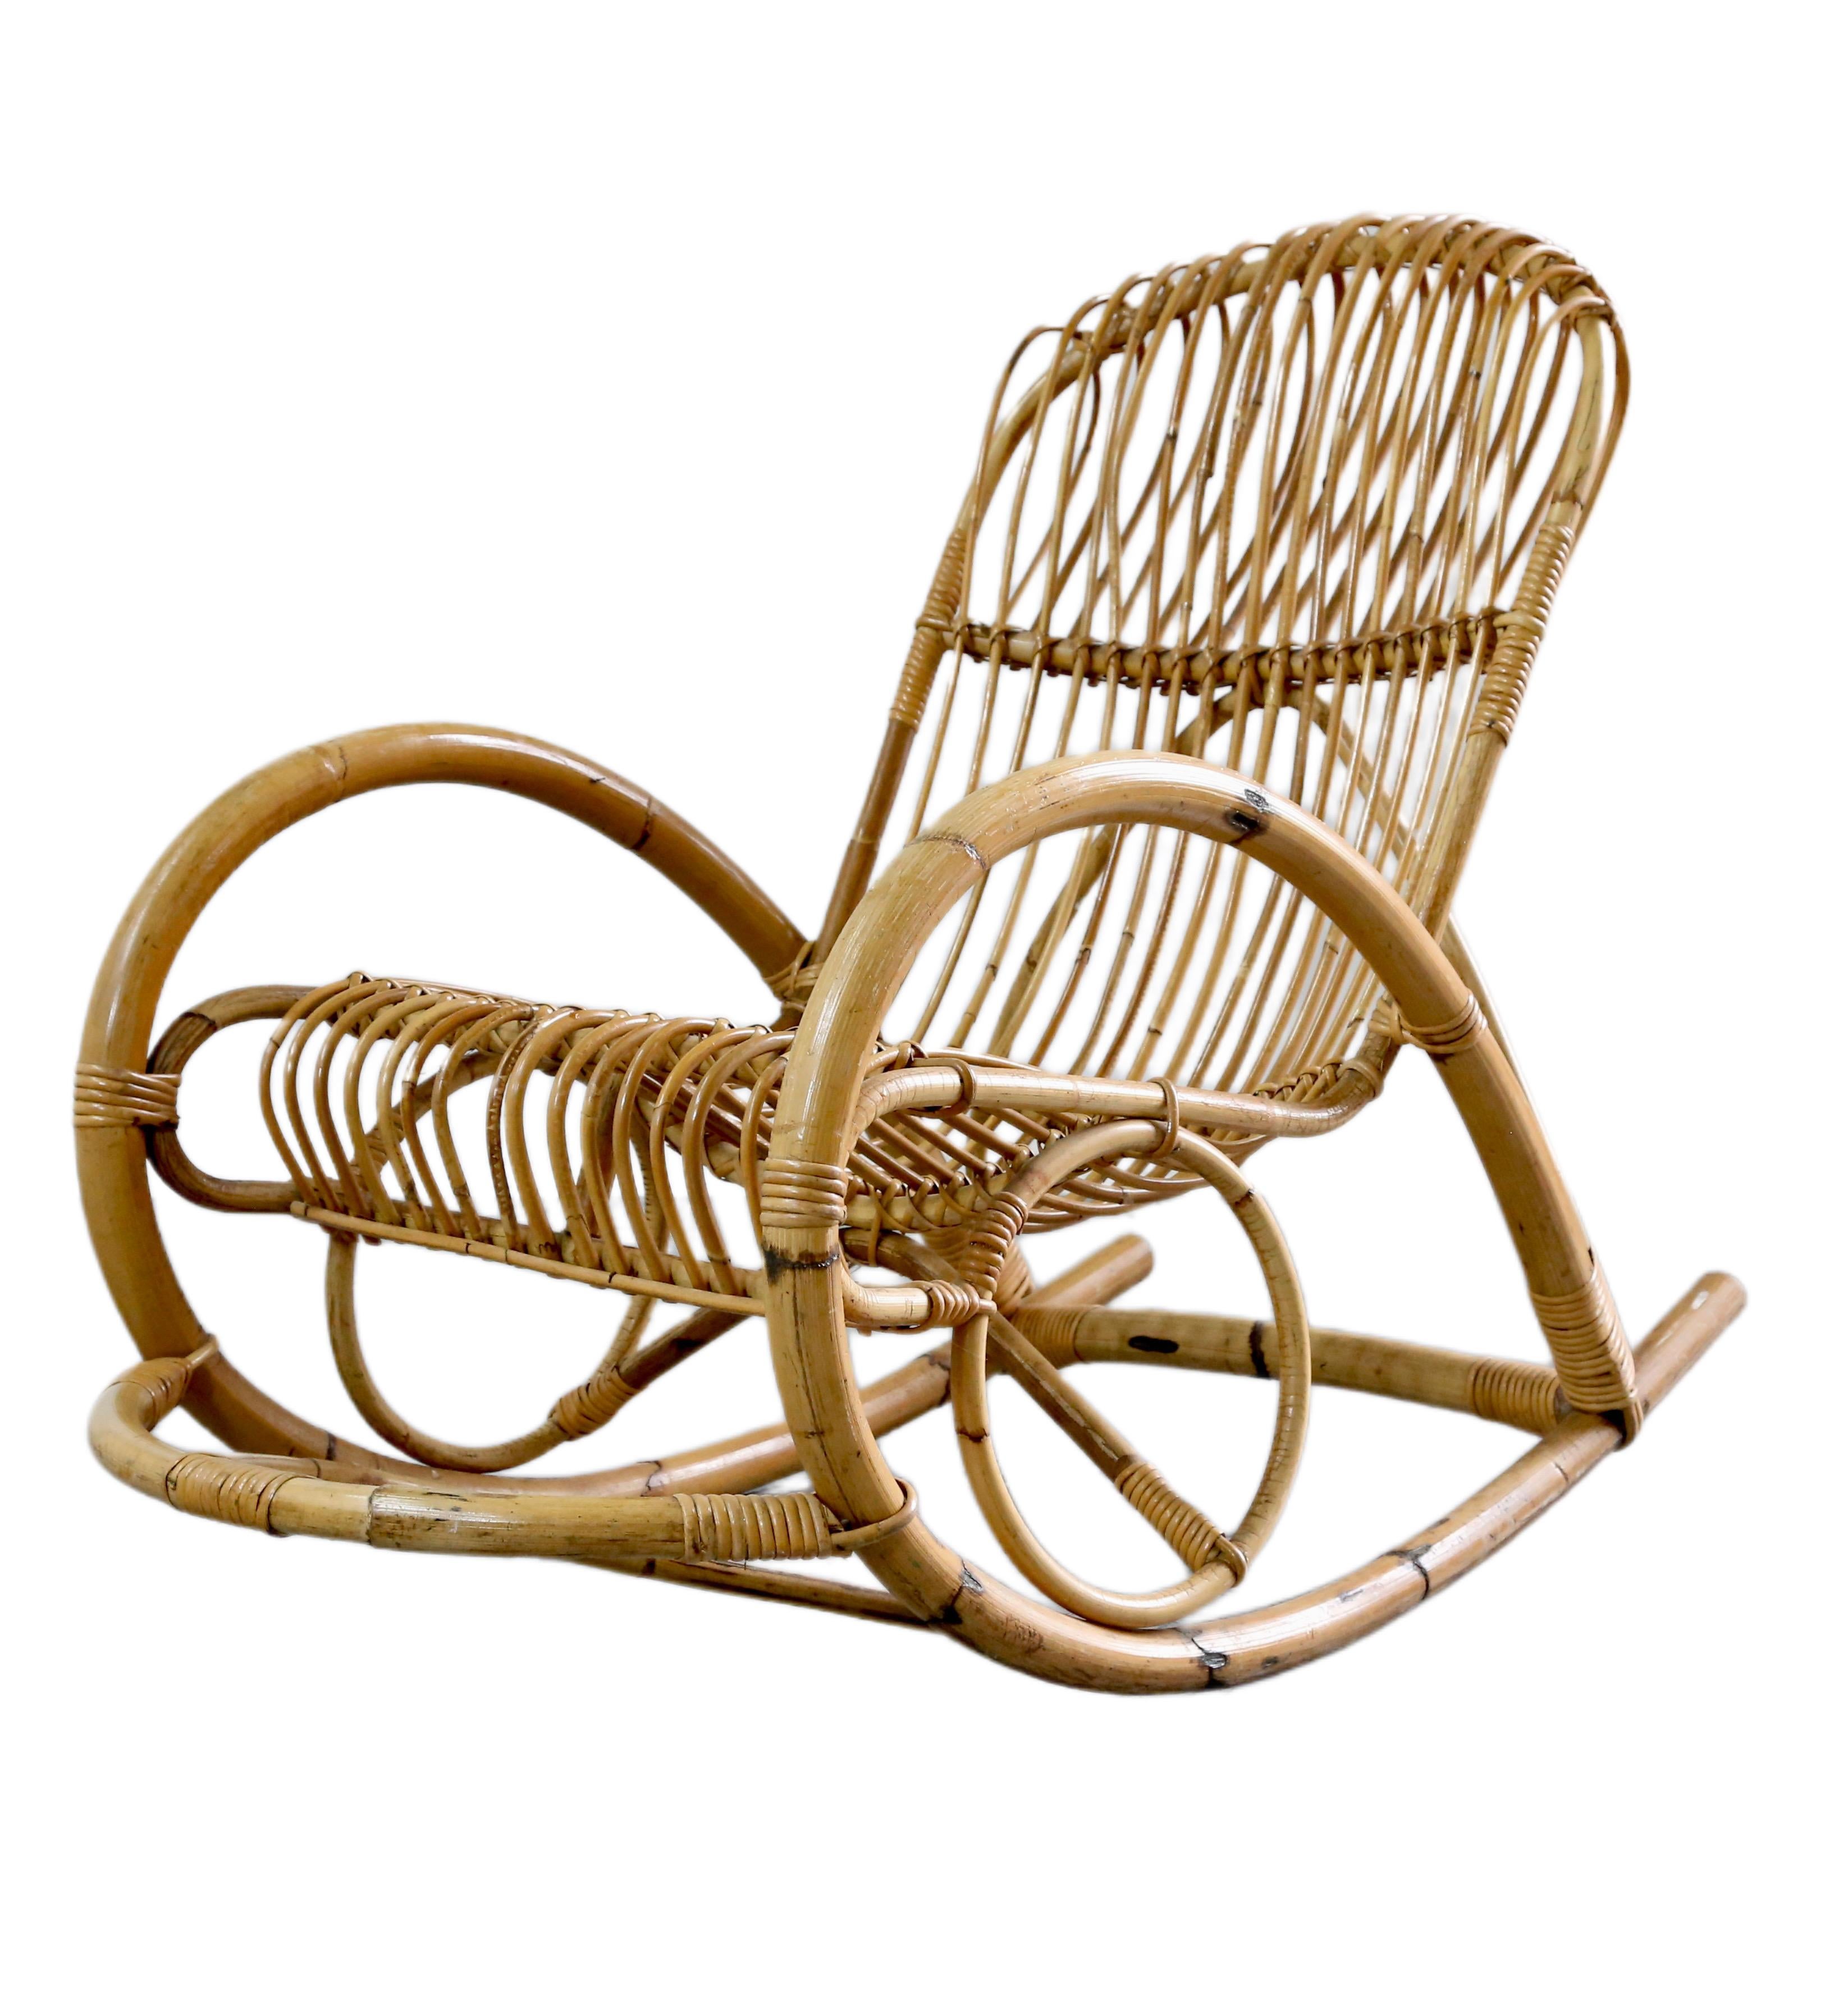 Hand-Crafted Boho Style Bamboo Wicker Rocking Chair By Dirk Van Sliedregt For Rohe Noordwolde For Sale